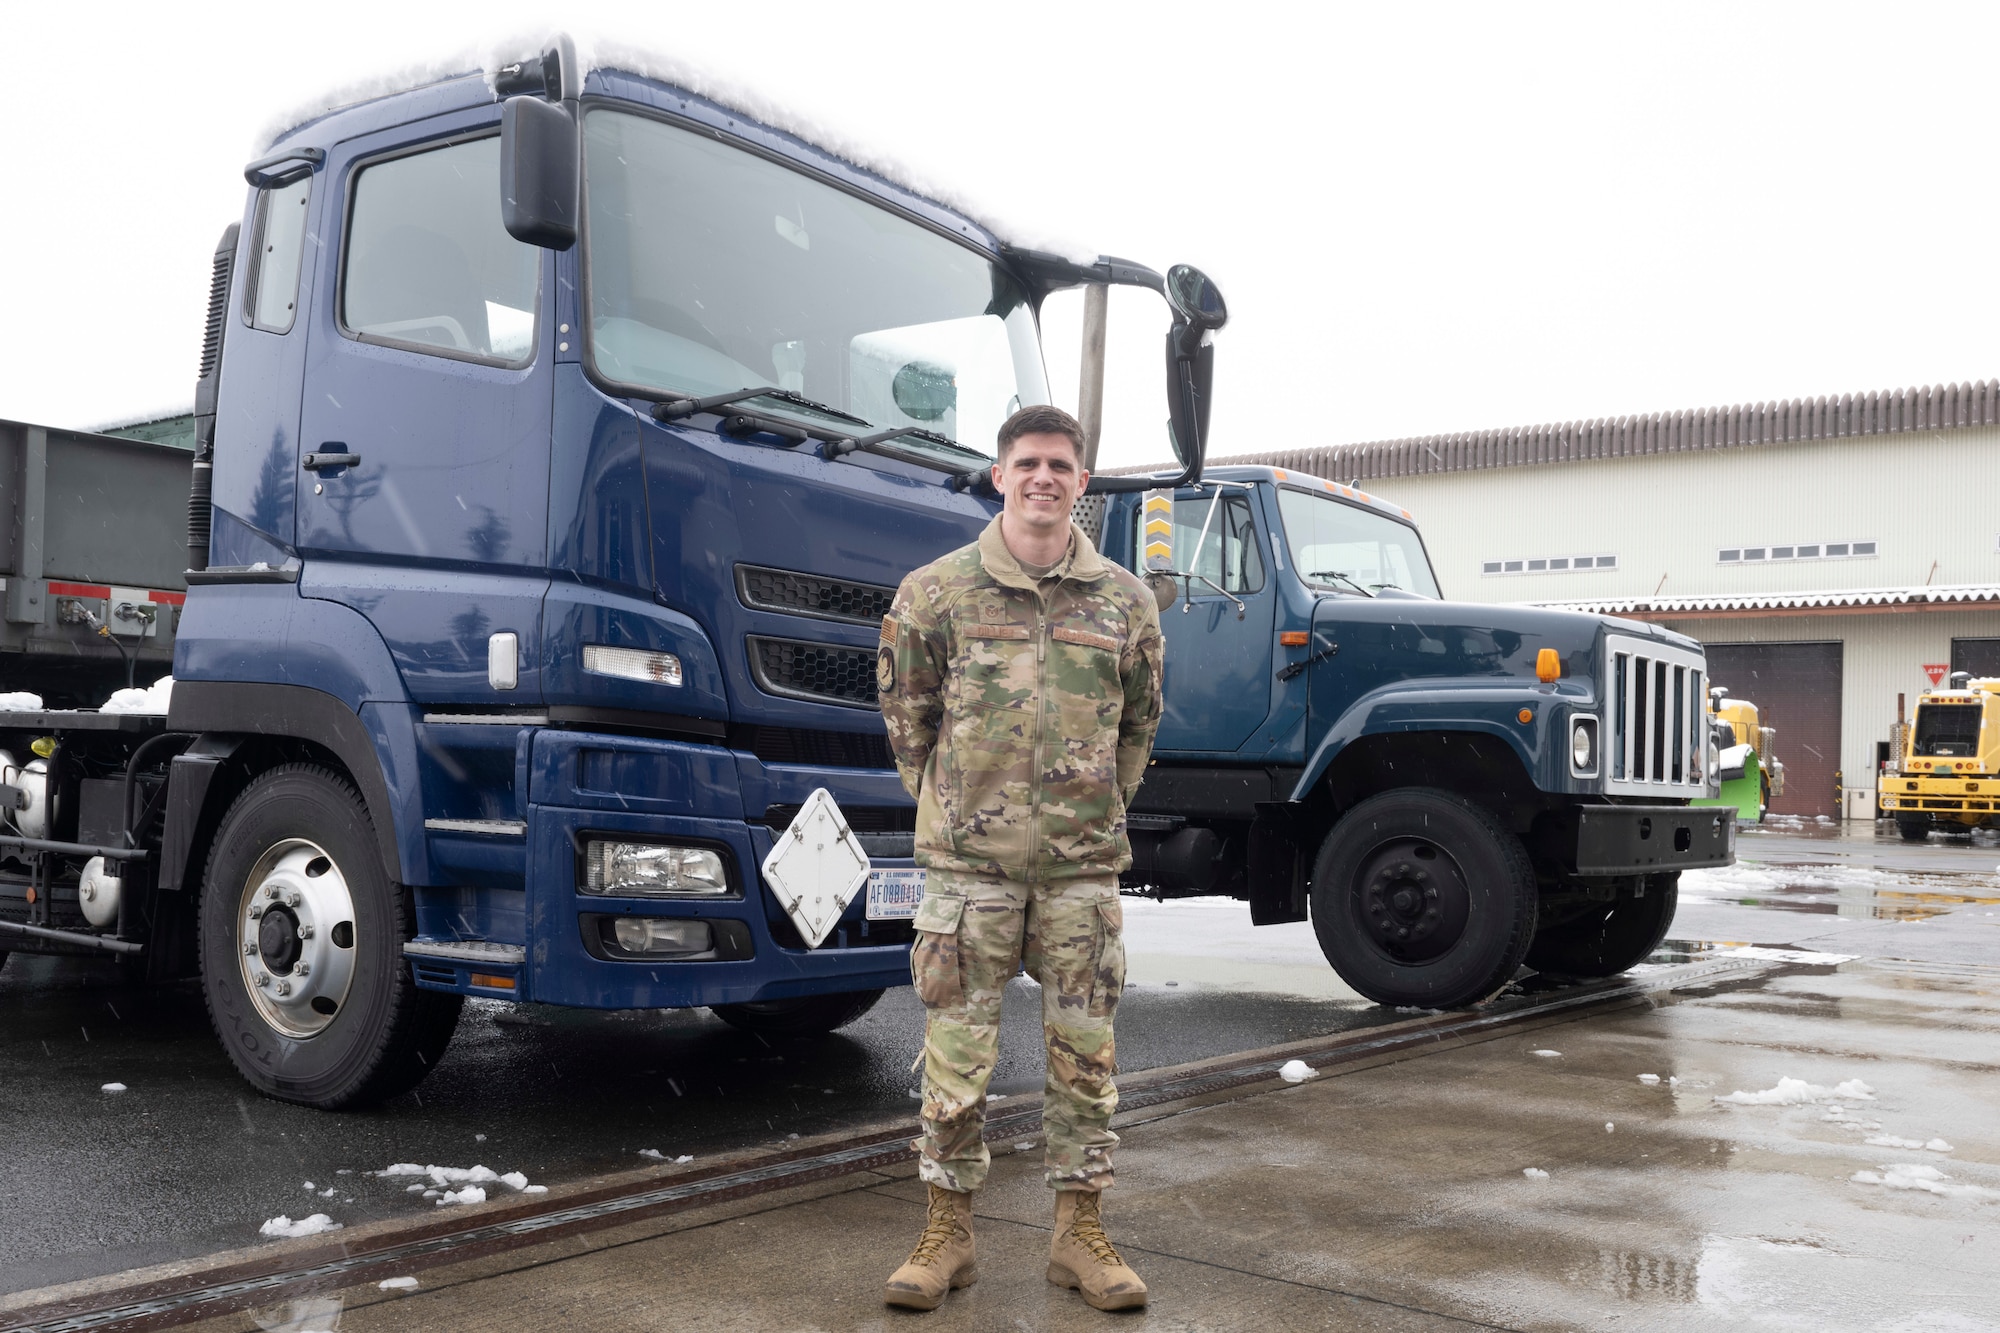 Tech. Sgt. Anthony Dillier, 35th Logistics Readiness Squadron (LRS) ground transportation noncommissioned officer in charge, stands in front of government-owned vehicles used by LRS at Misawa Air Base, Japan, Feb. 26, 2024.